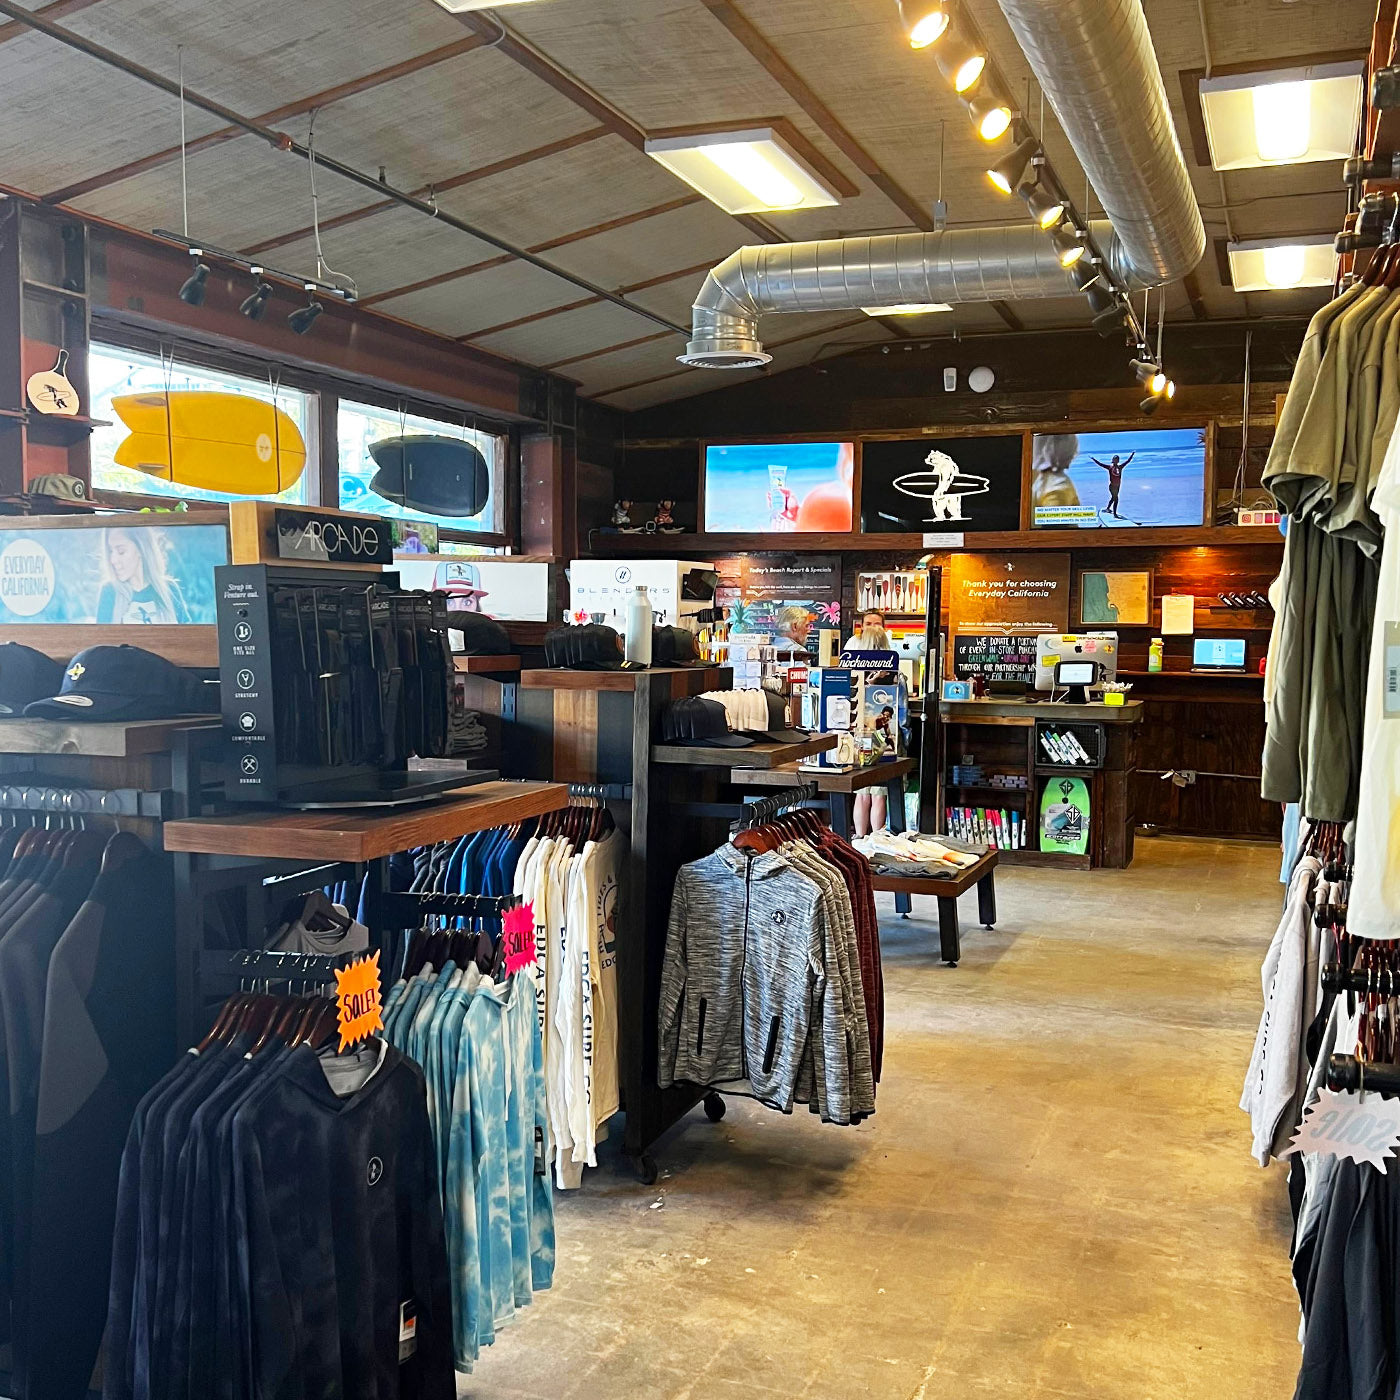 Photo of the inside of the Everyday California store in La Jolla, California